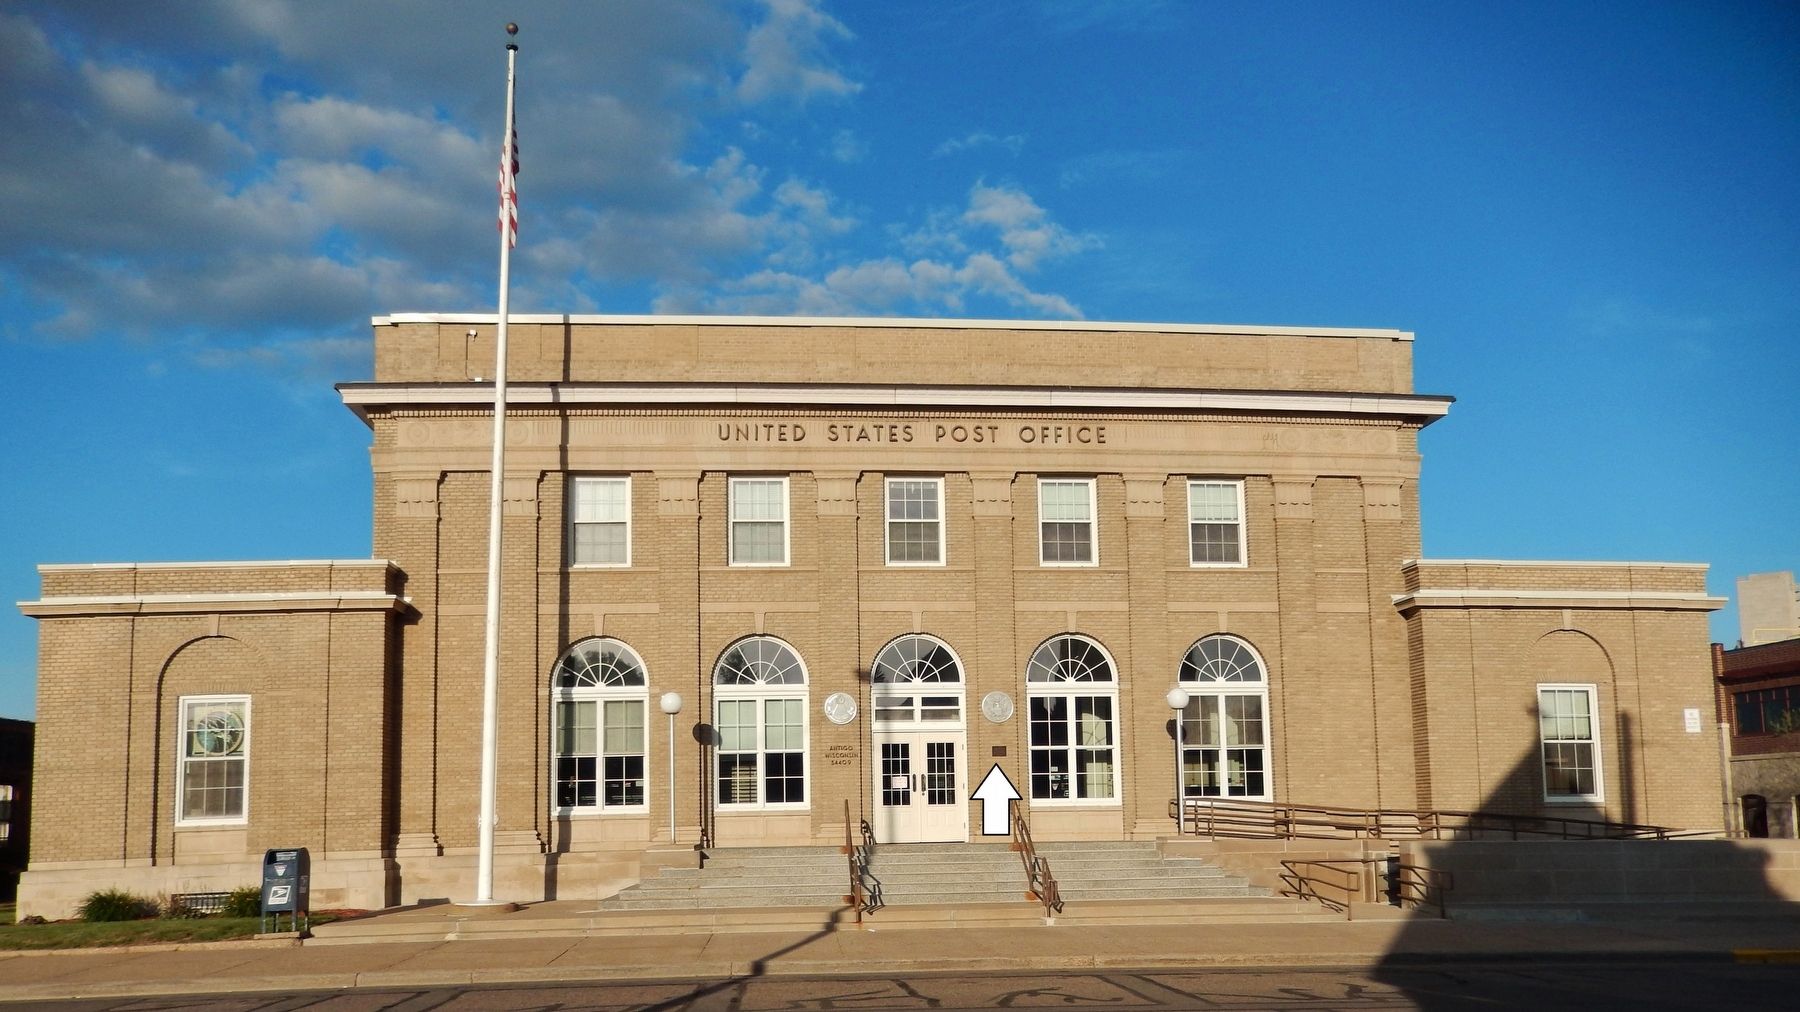 U.S. Post Office Antigo, Wisconsin (<i>Clermont Street view; marker visible right of entrance</i>) image. Click for full size.